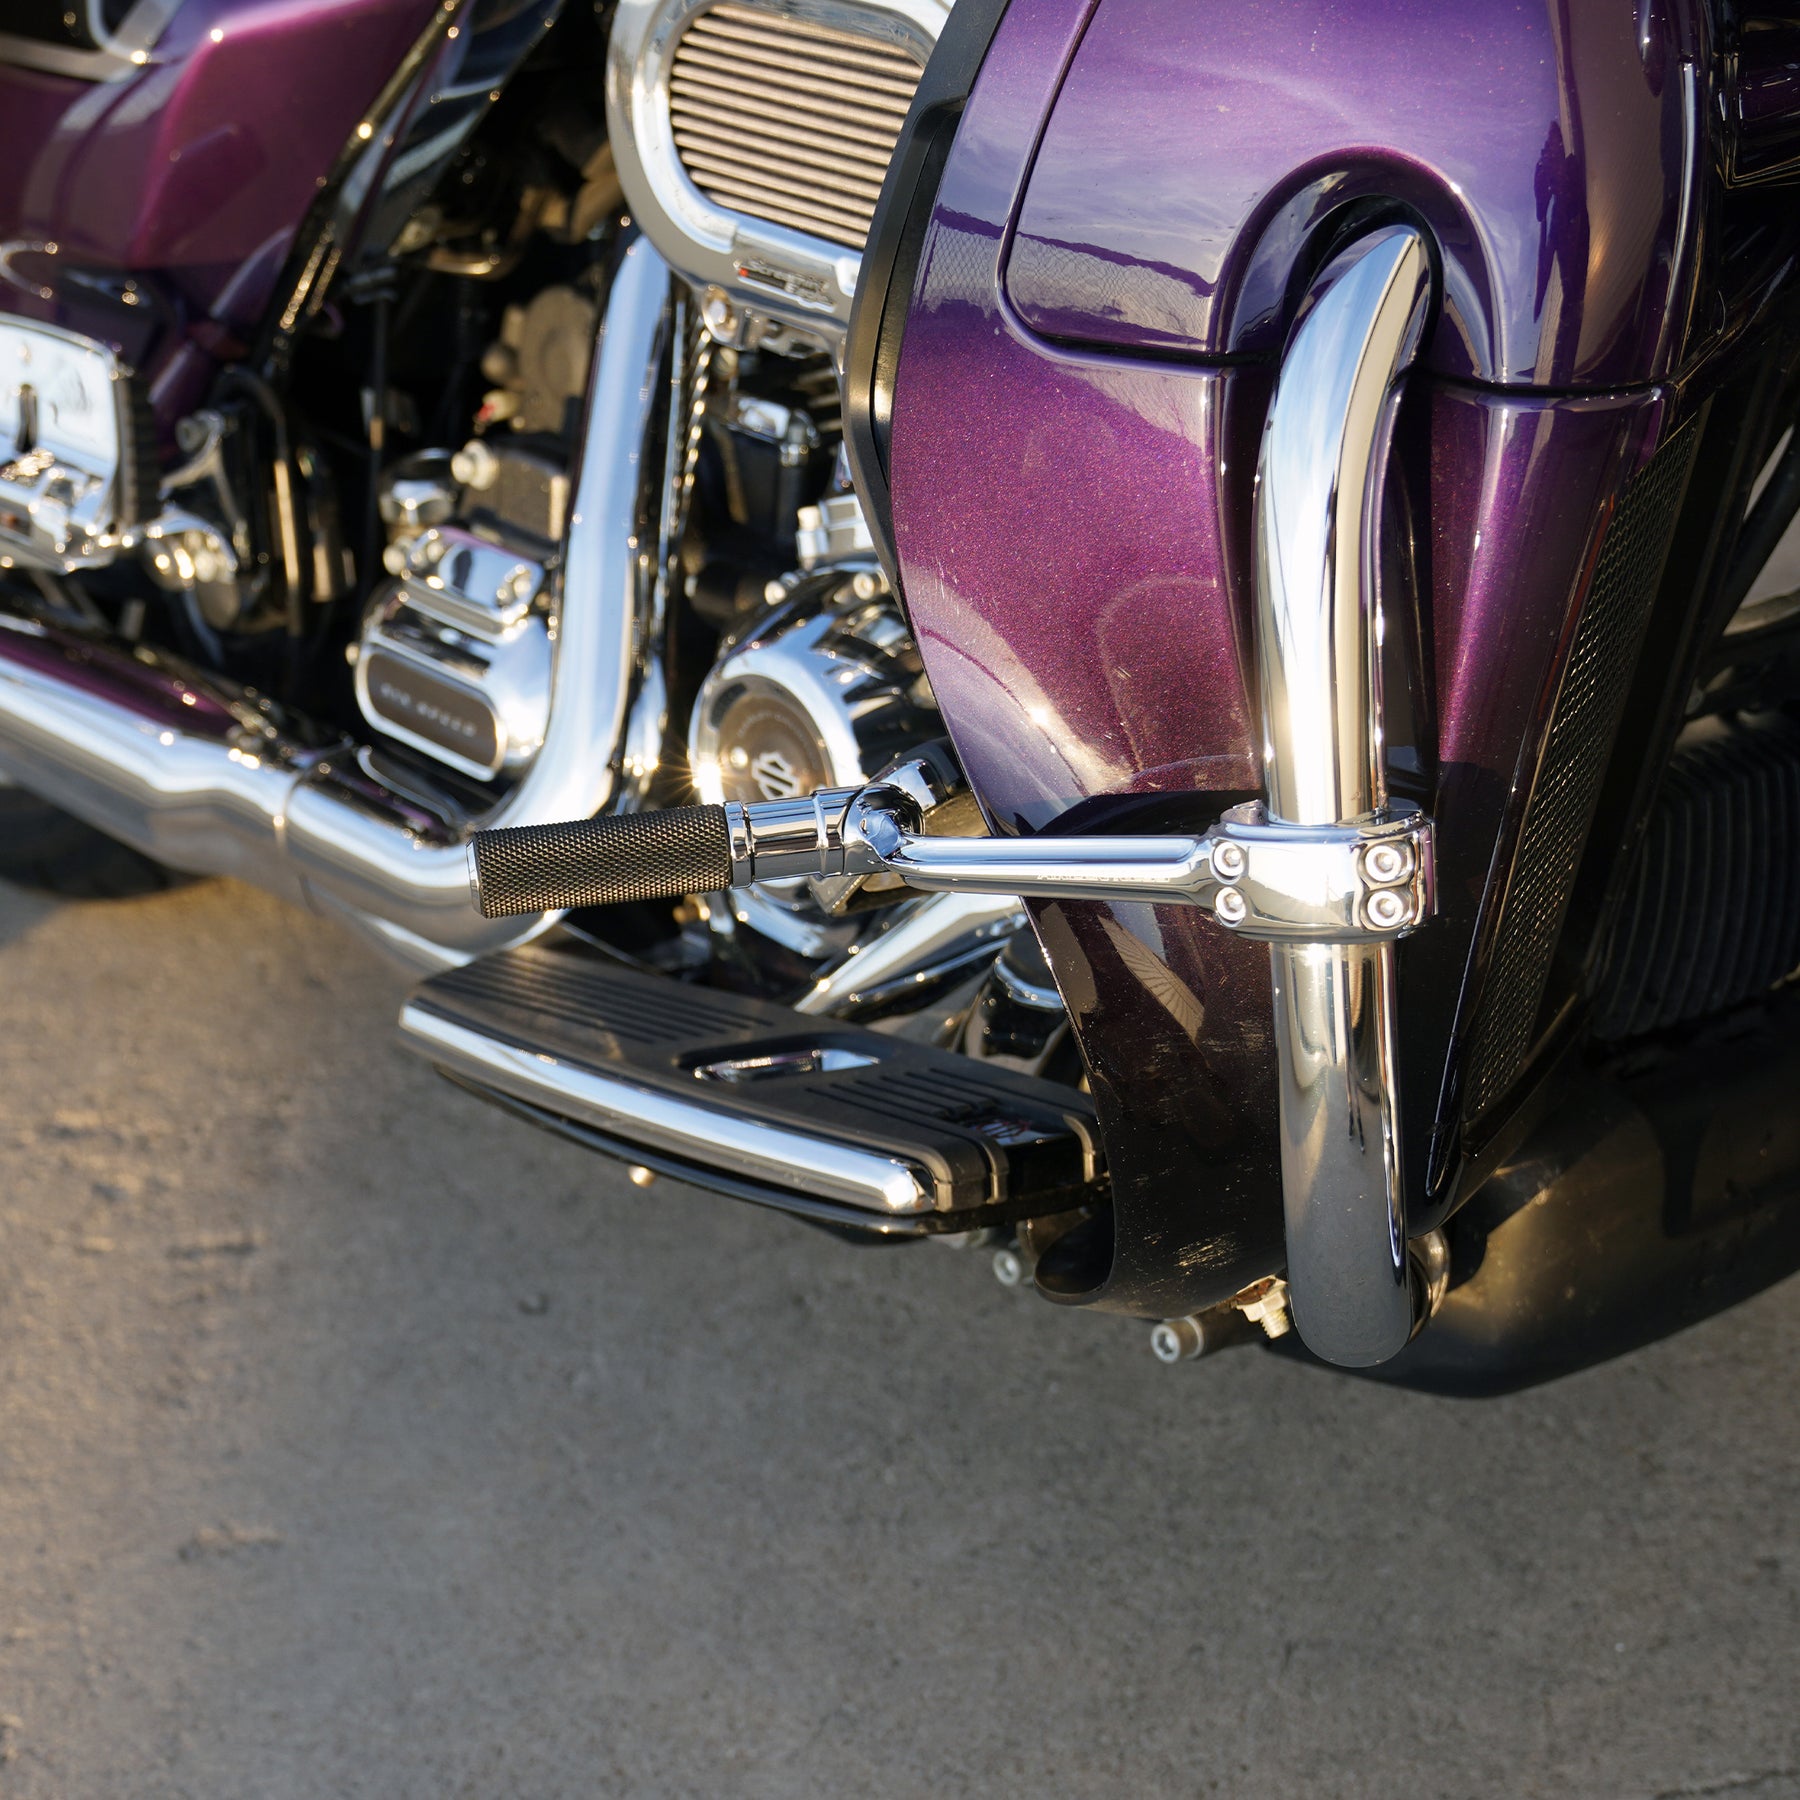 Forged Highway Pegs, Chrome